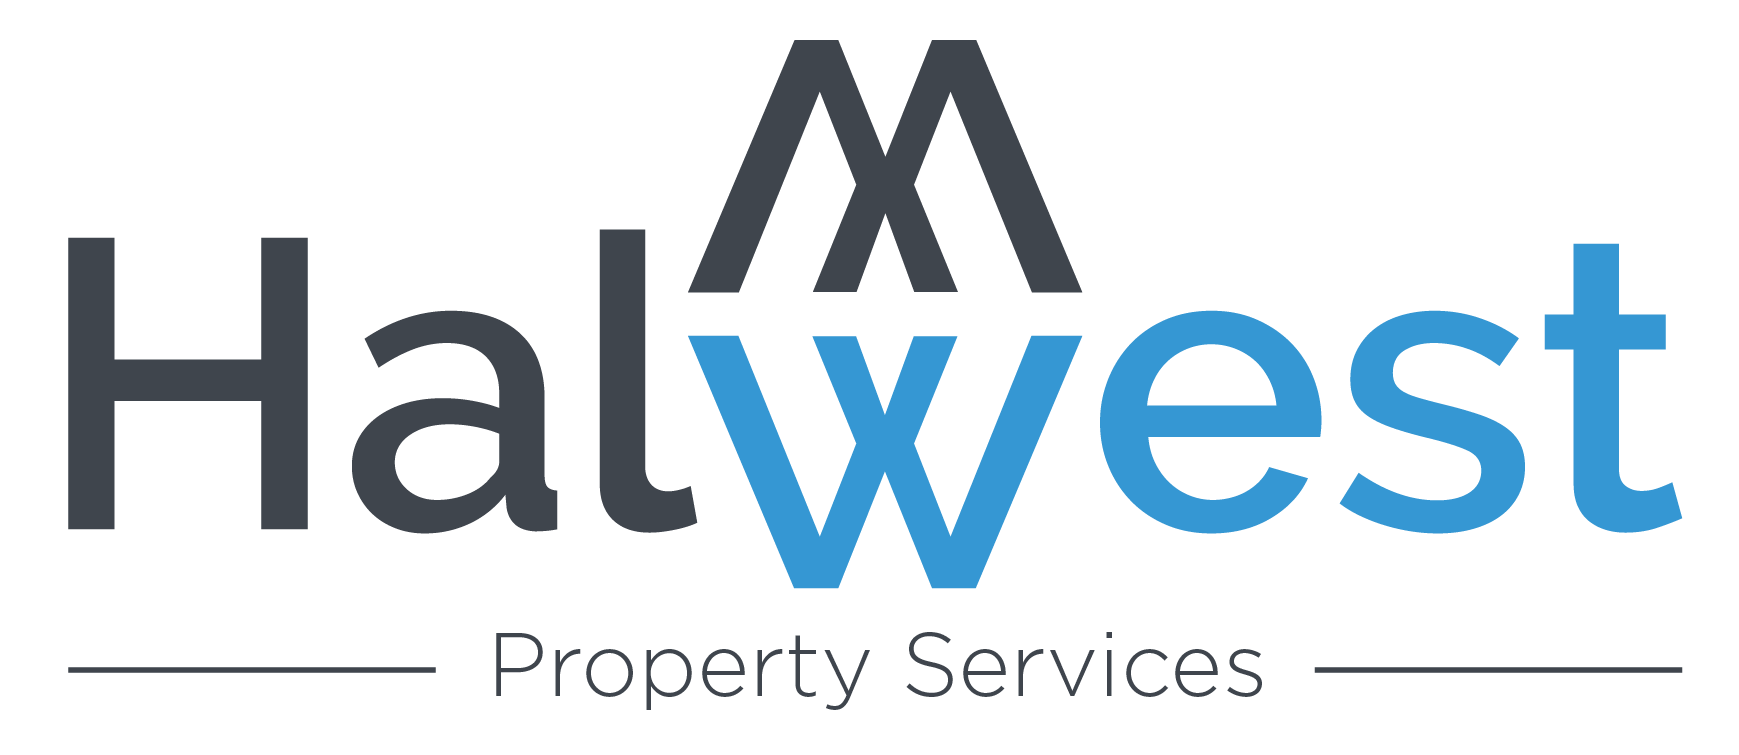 Halwest Property Services